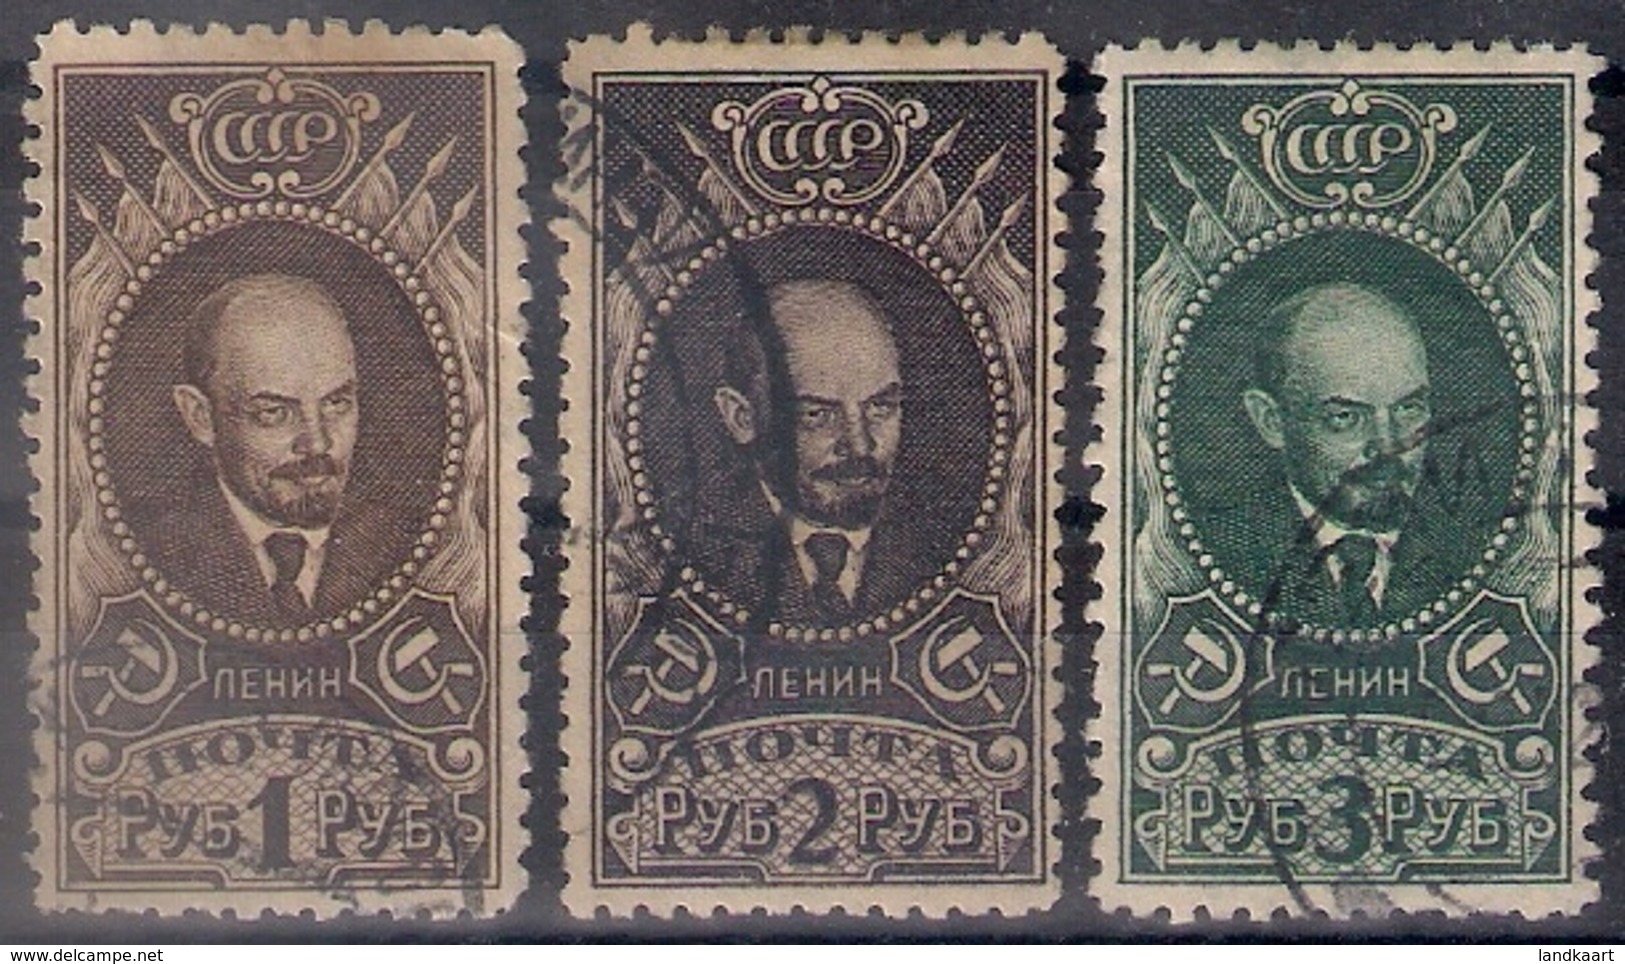 Russia 1926, Michel Nr 308-10, Used - Used Stamps